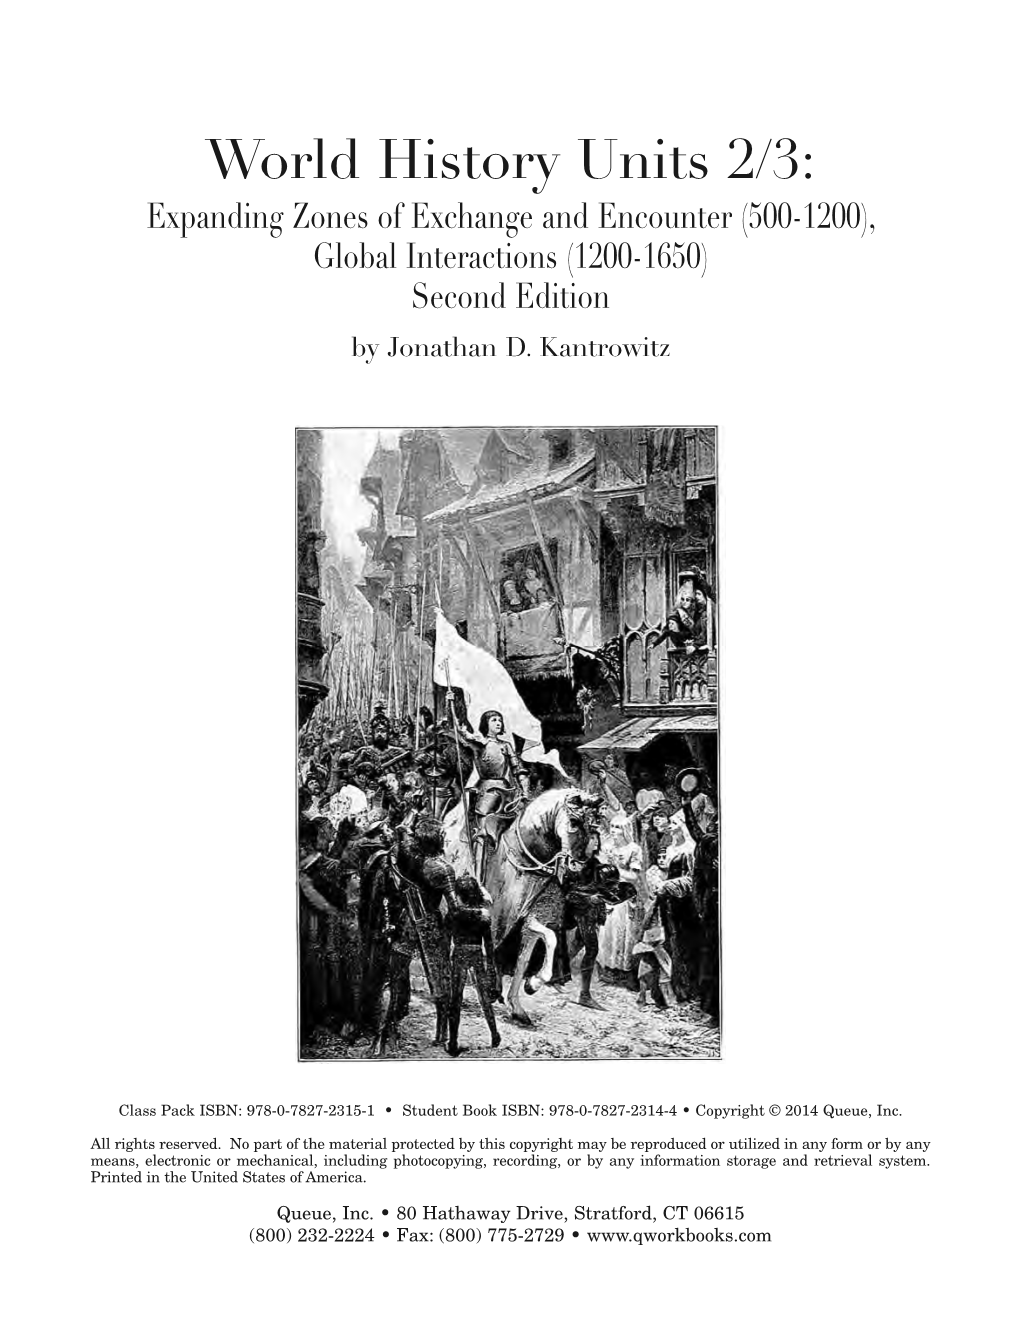 World History Units 2/3: Expanding Zones of Exchange and Encounter (500-1200), Global Interactions (1200-1650) Second Edition by Jonathan D